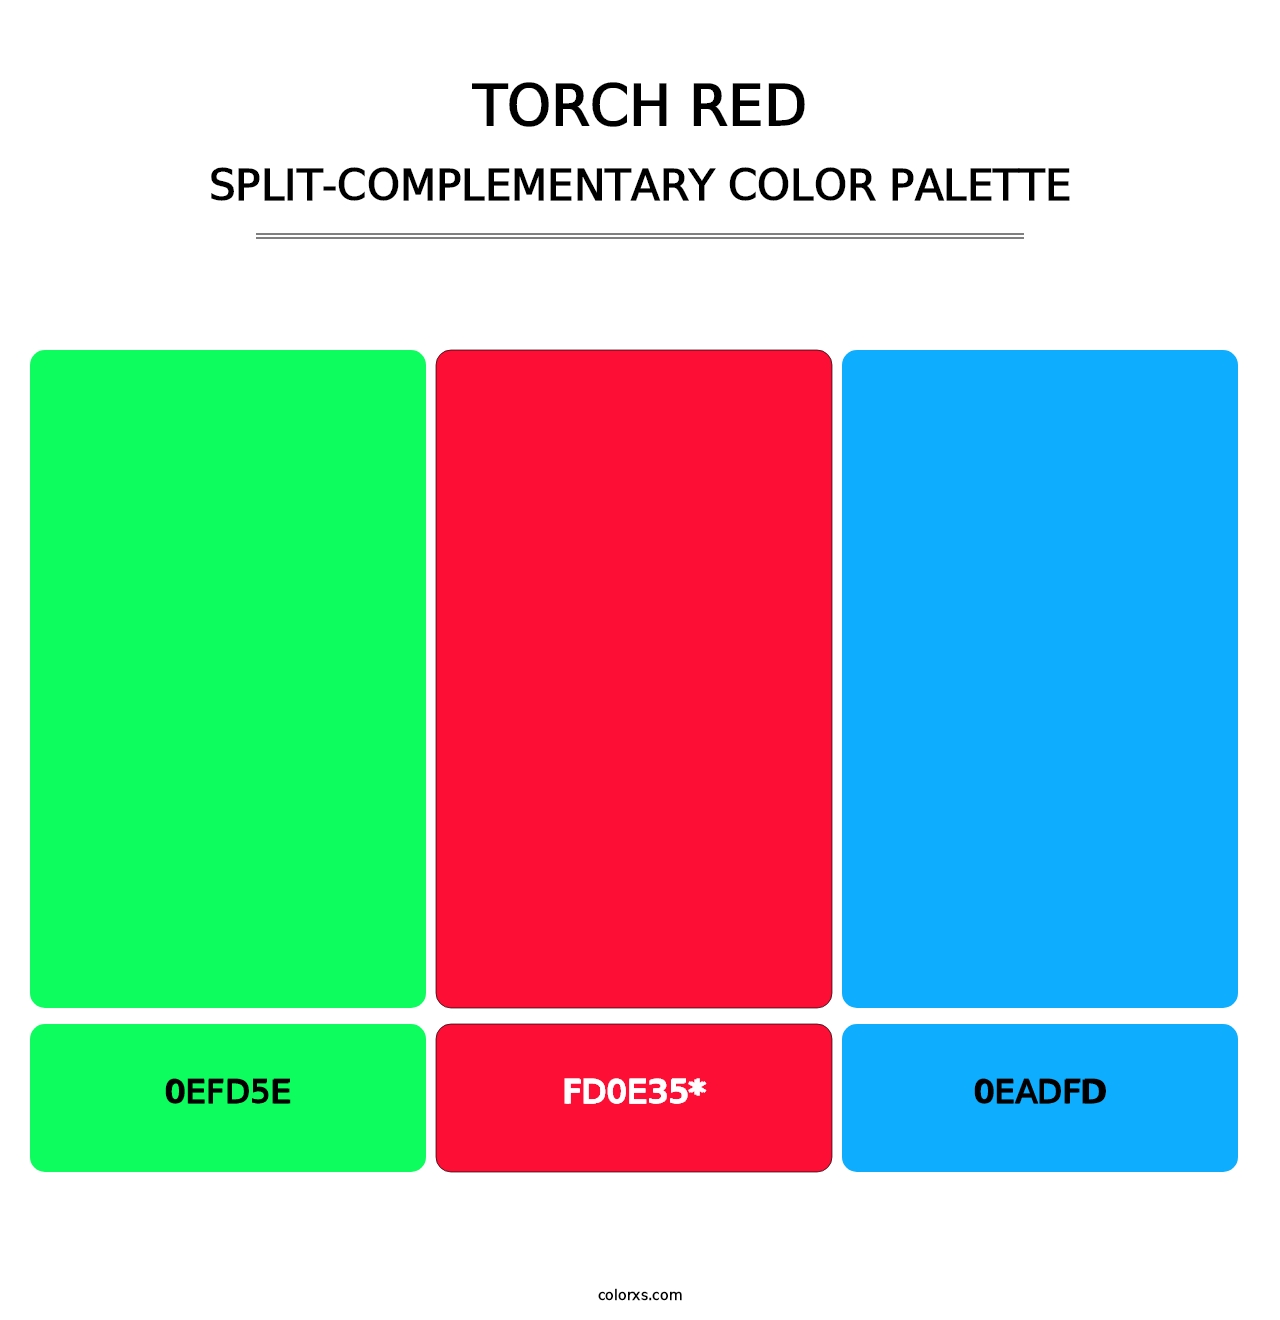 Torch Red - Split-Complementary Color Palette